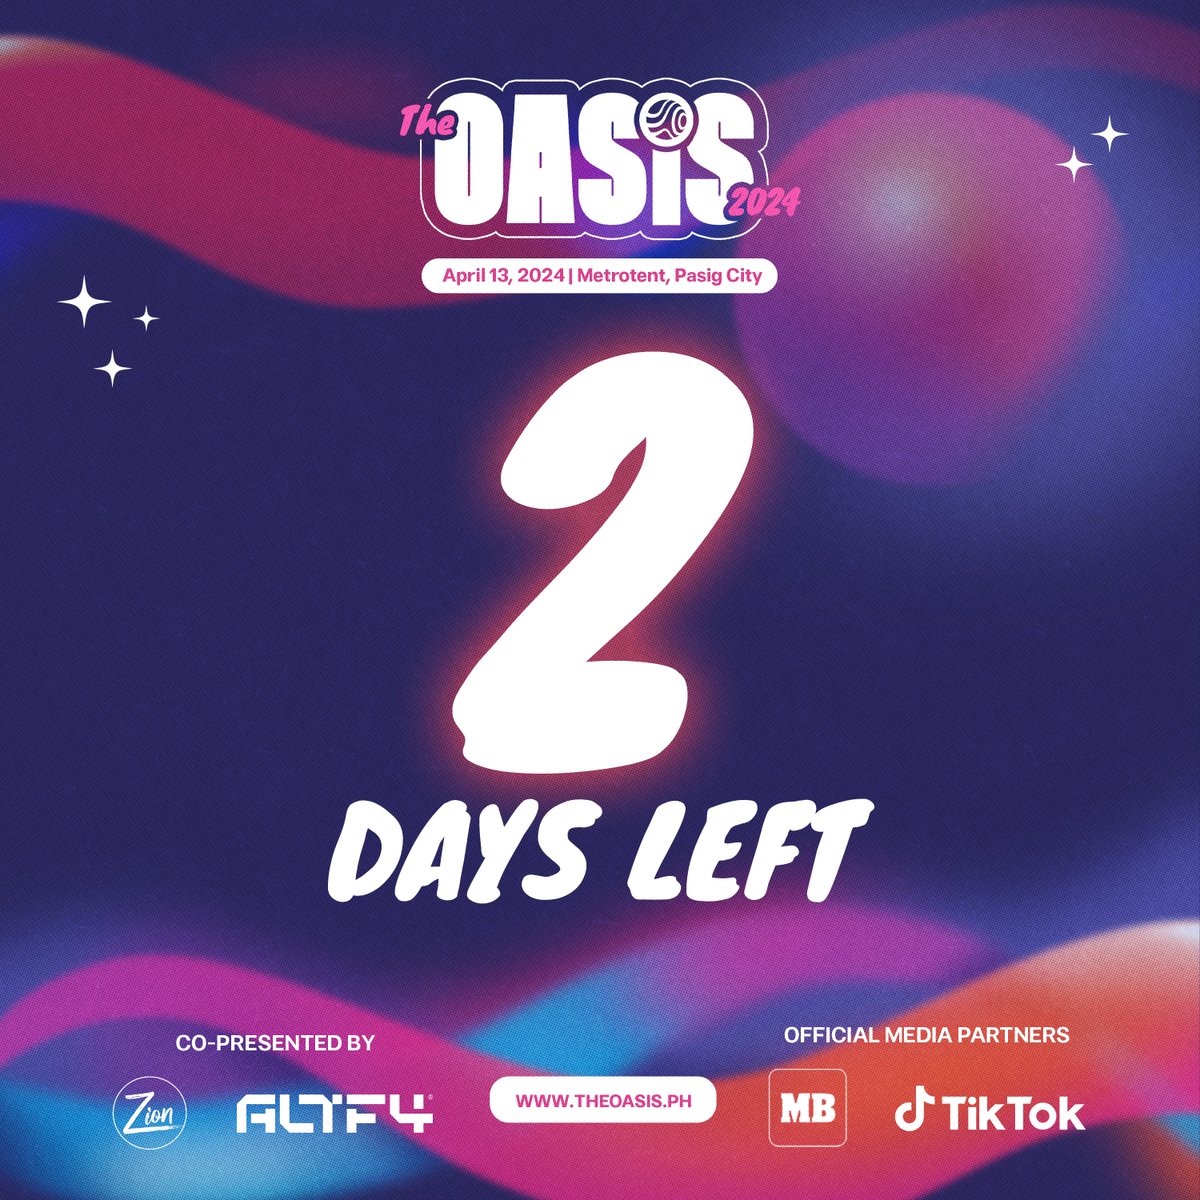 2 DAYS BEFORE THE OASIS ARRIVES

2 more nights then the party begins. Time to show off your the goodie bags that you claimed yesterday!

#TheOASIS2024 #SinceDayOne